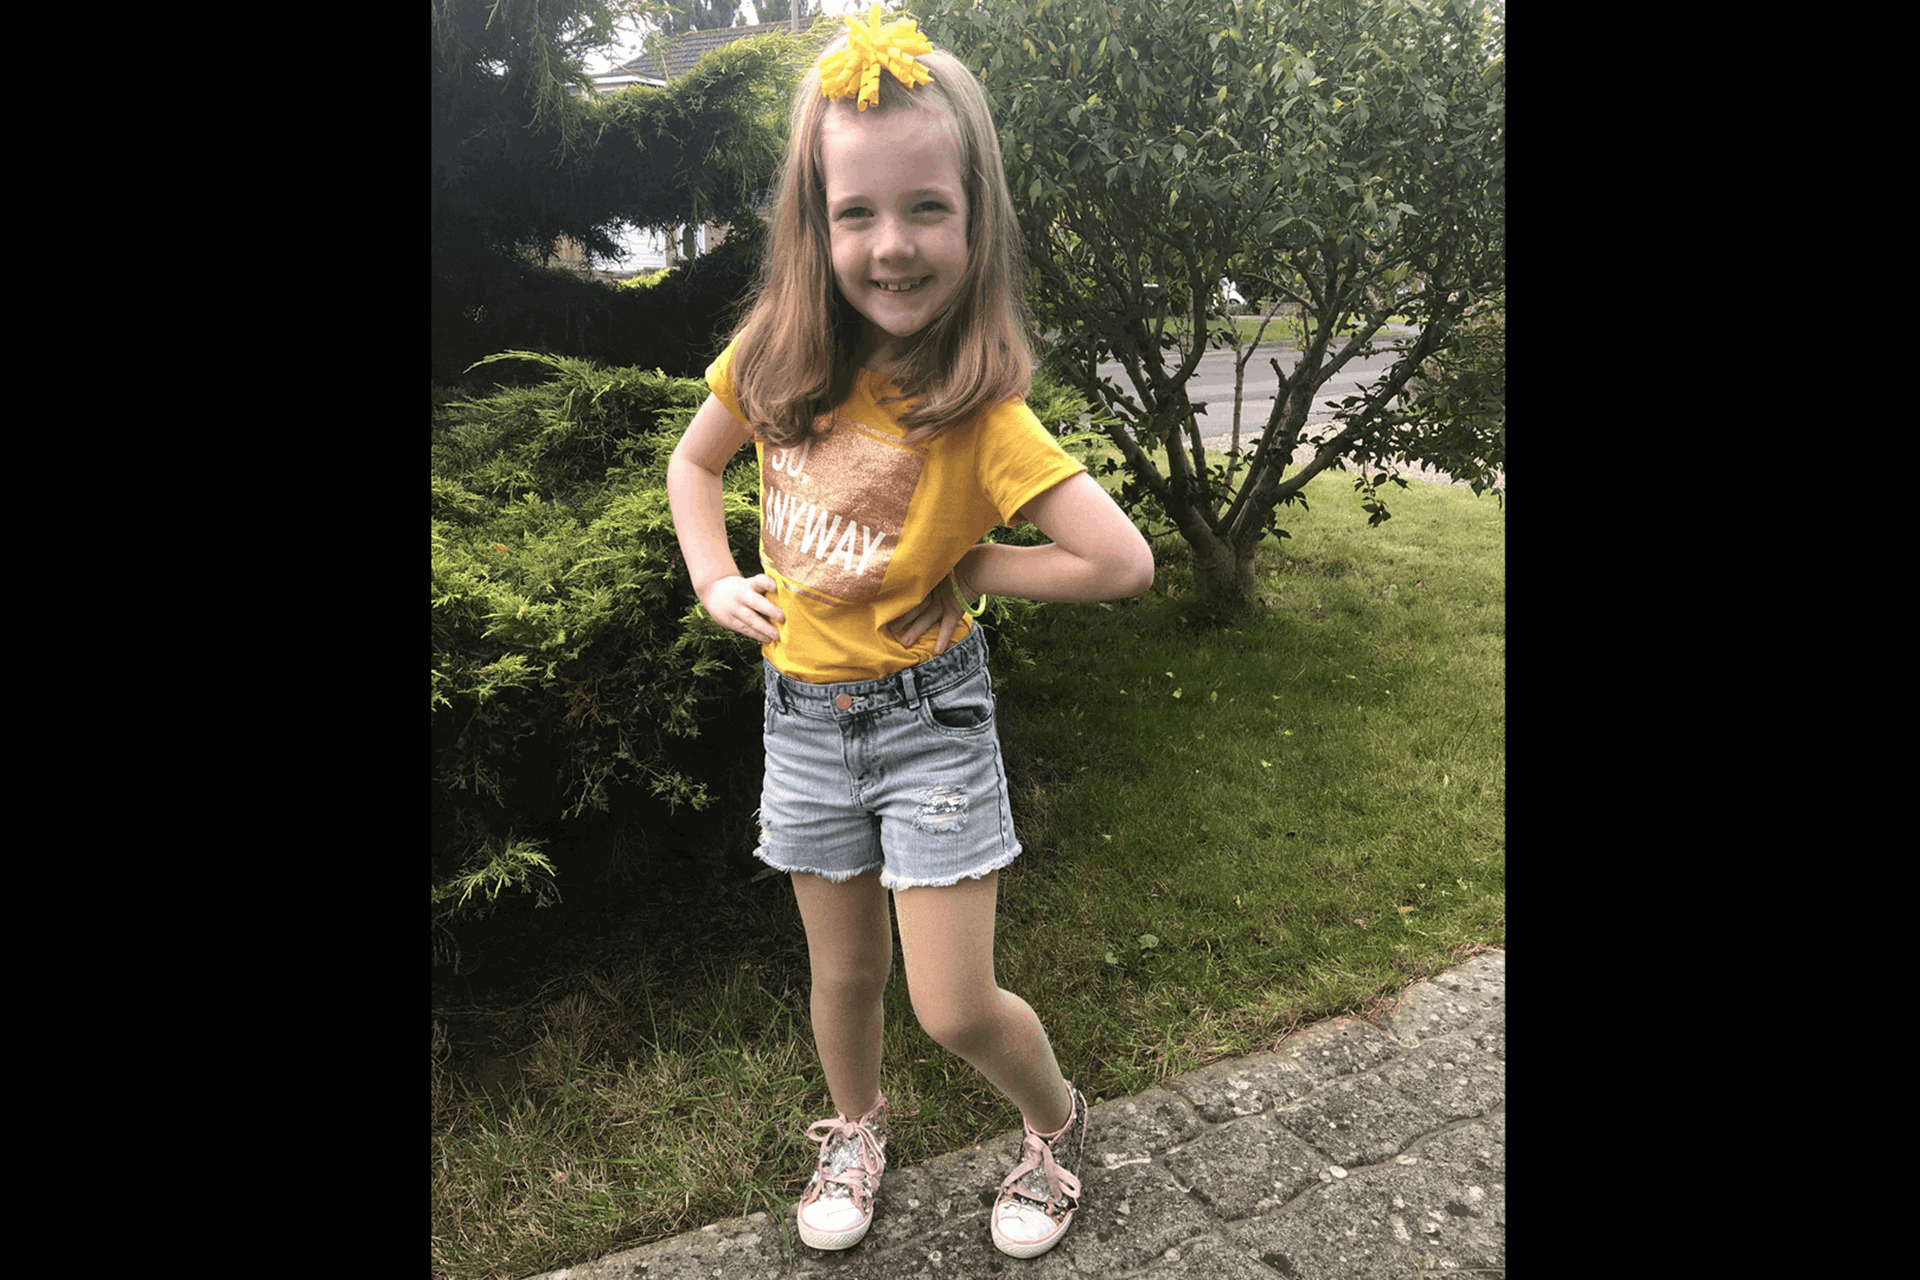 A young person stands with their hands on their hips wearing shorts, a yellow top and yellow bow in their hair.